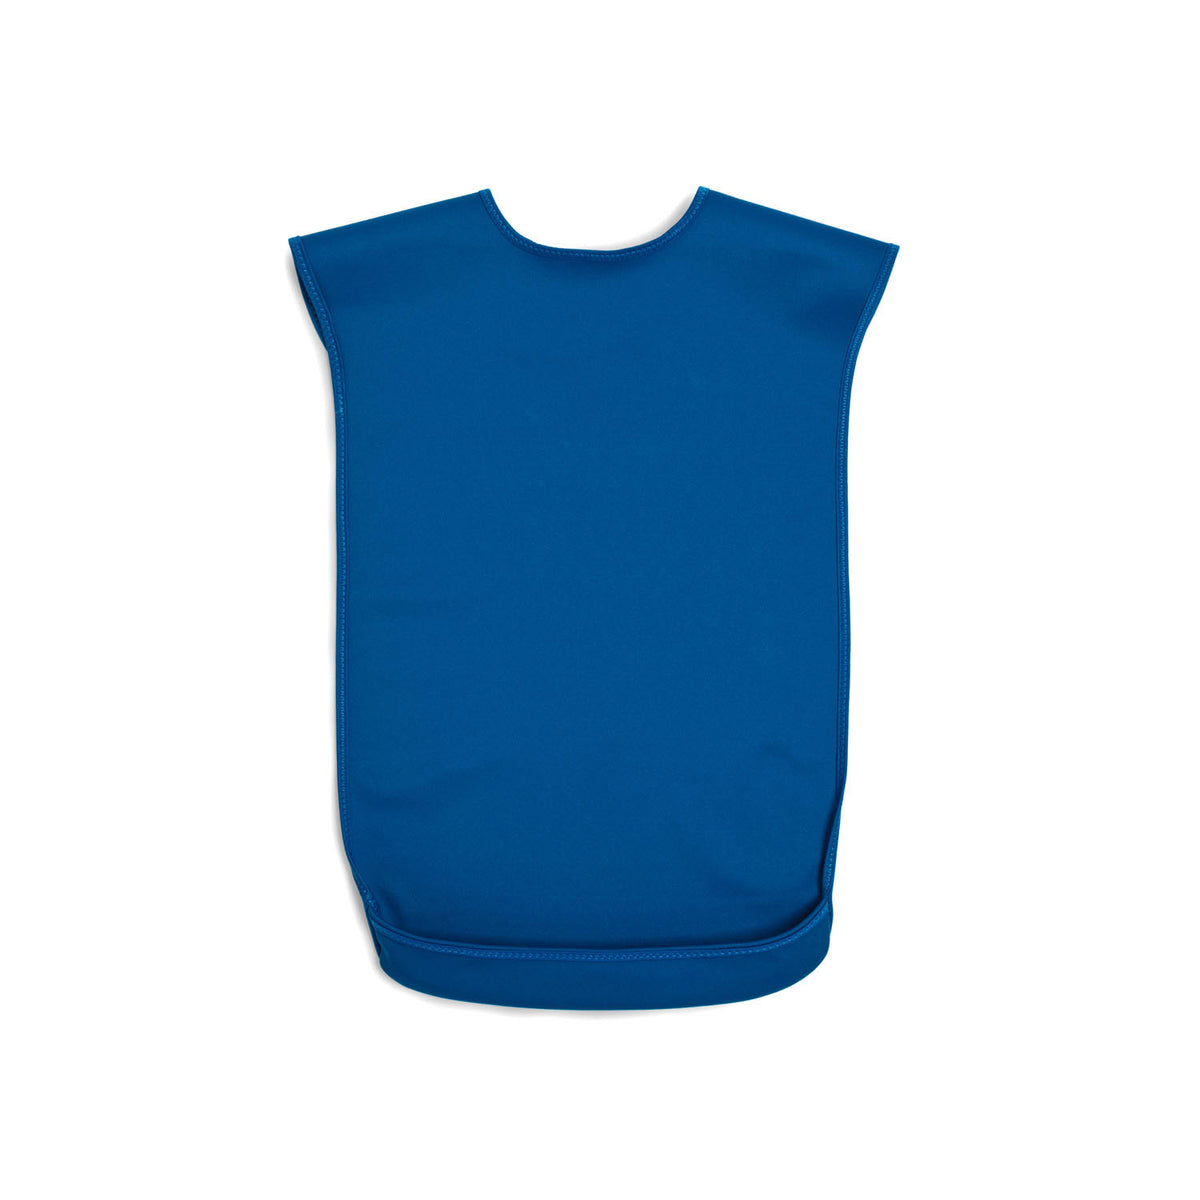 Tabard style adult bib - Small Blue | Health Care | Care Designs